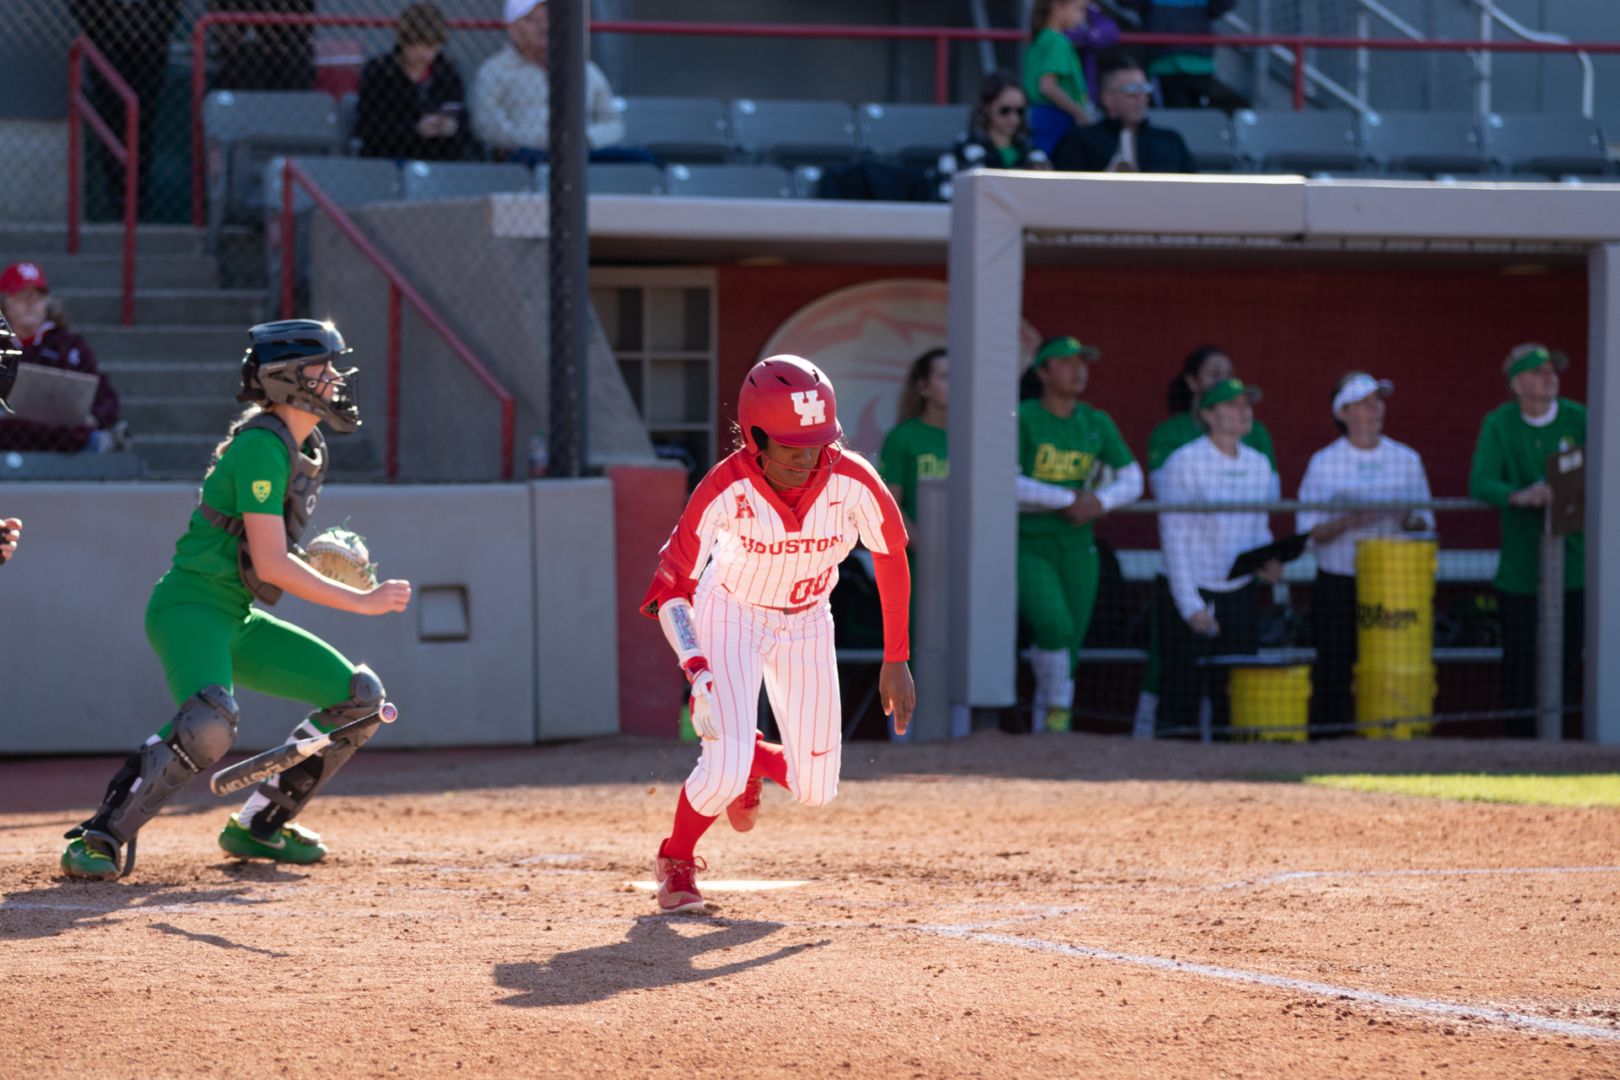 Senior outfielder Lindsey Stewart hit for five RBIs, boosting the Cougars to an 11-3 win over the LA Tech Lady Techsters on Sunday at Cougar Softball Stadium. | Kathryn Lenihan/The Cougar